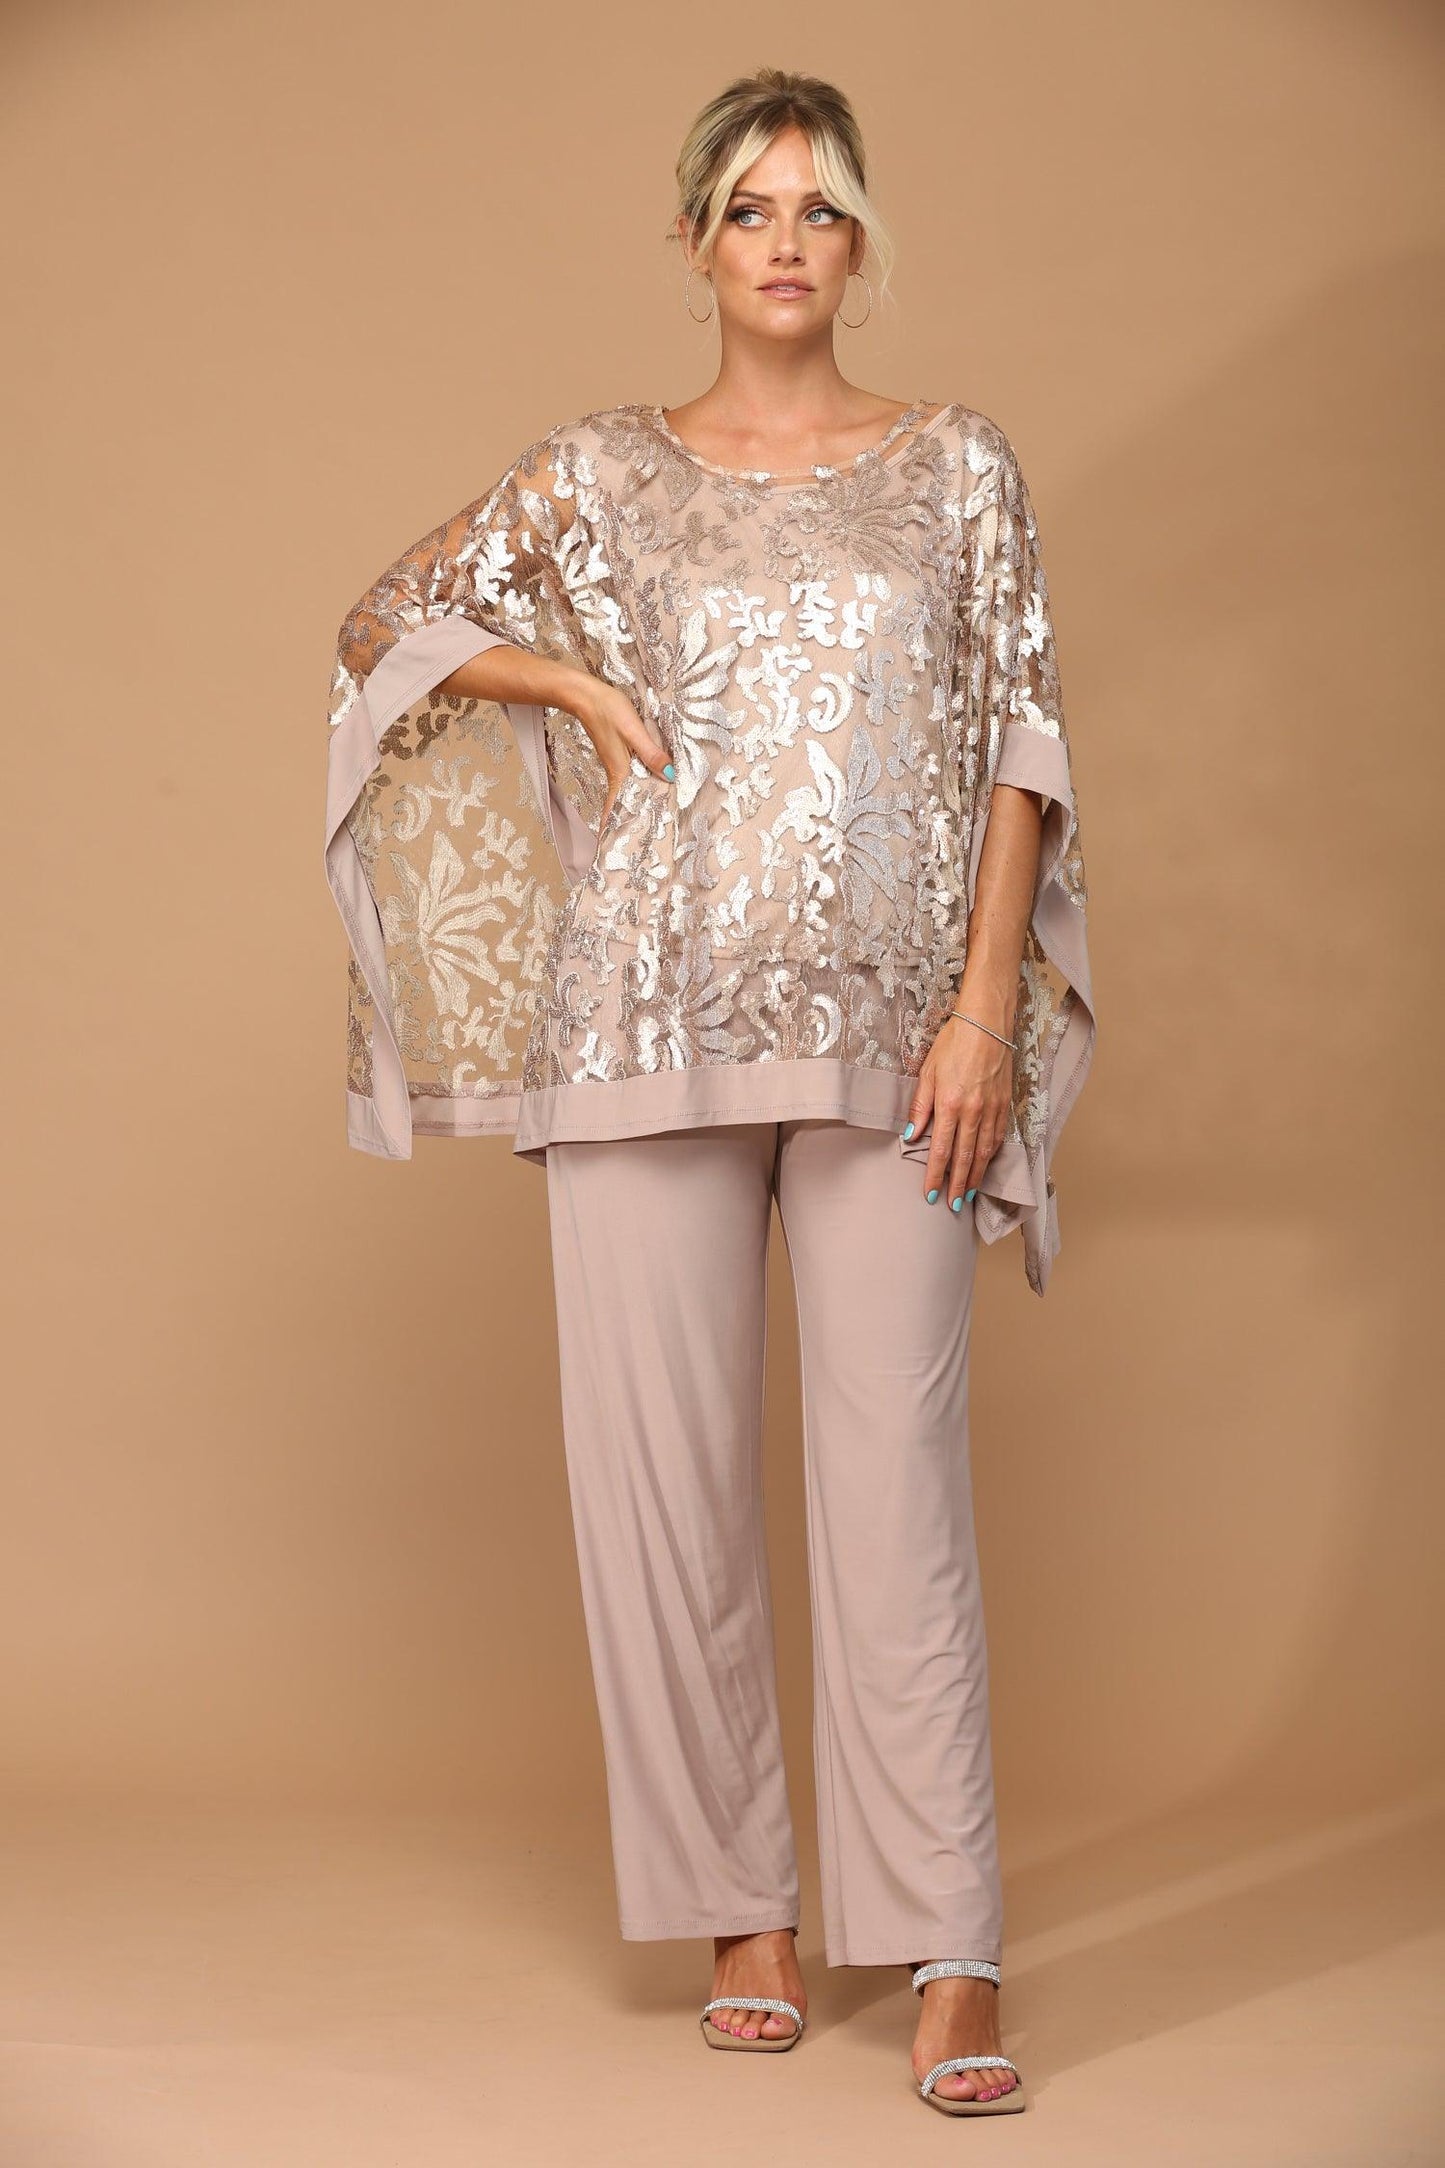 Long Formal Mother of the Bride Cape Pant Set